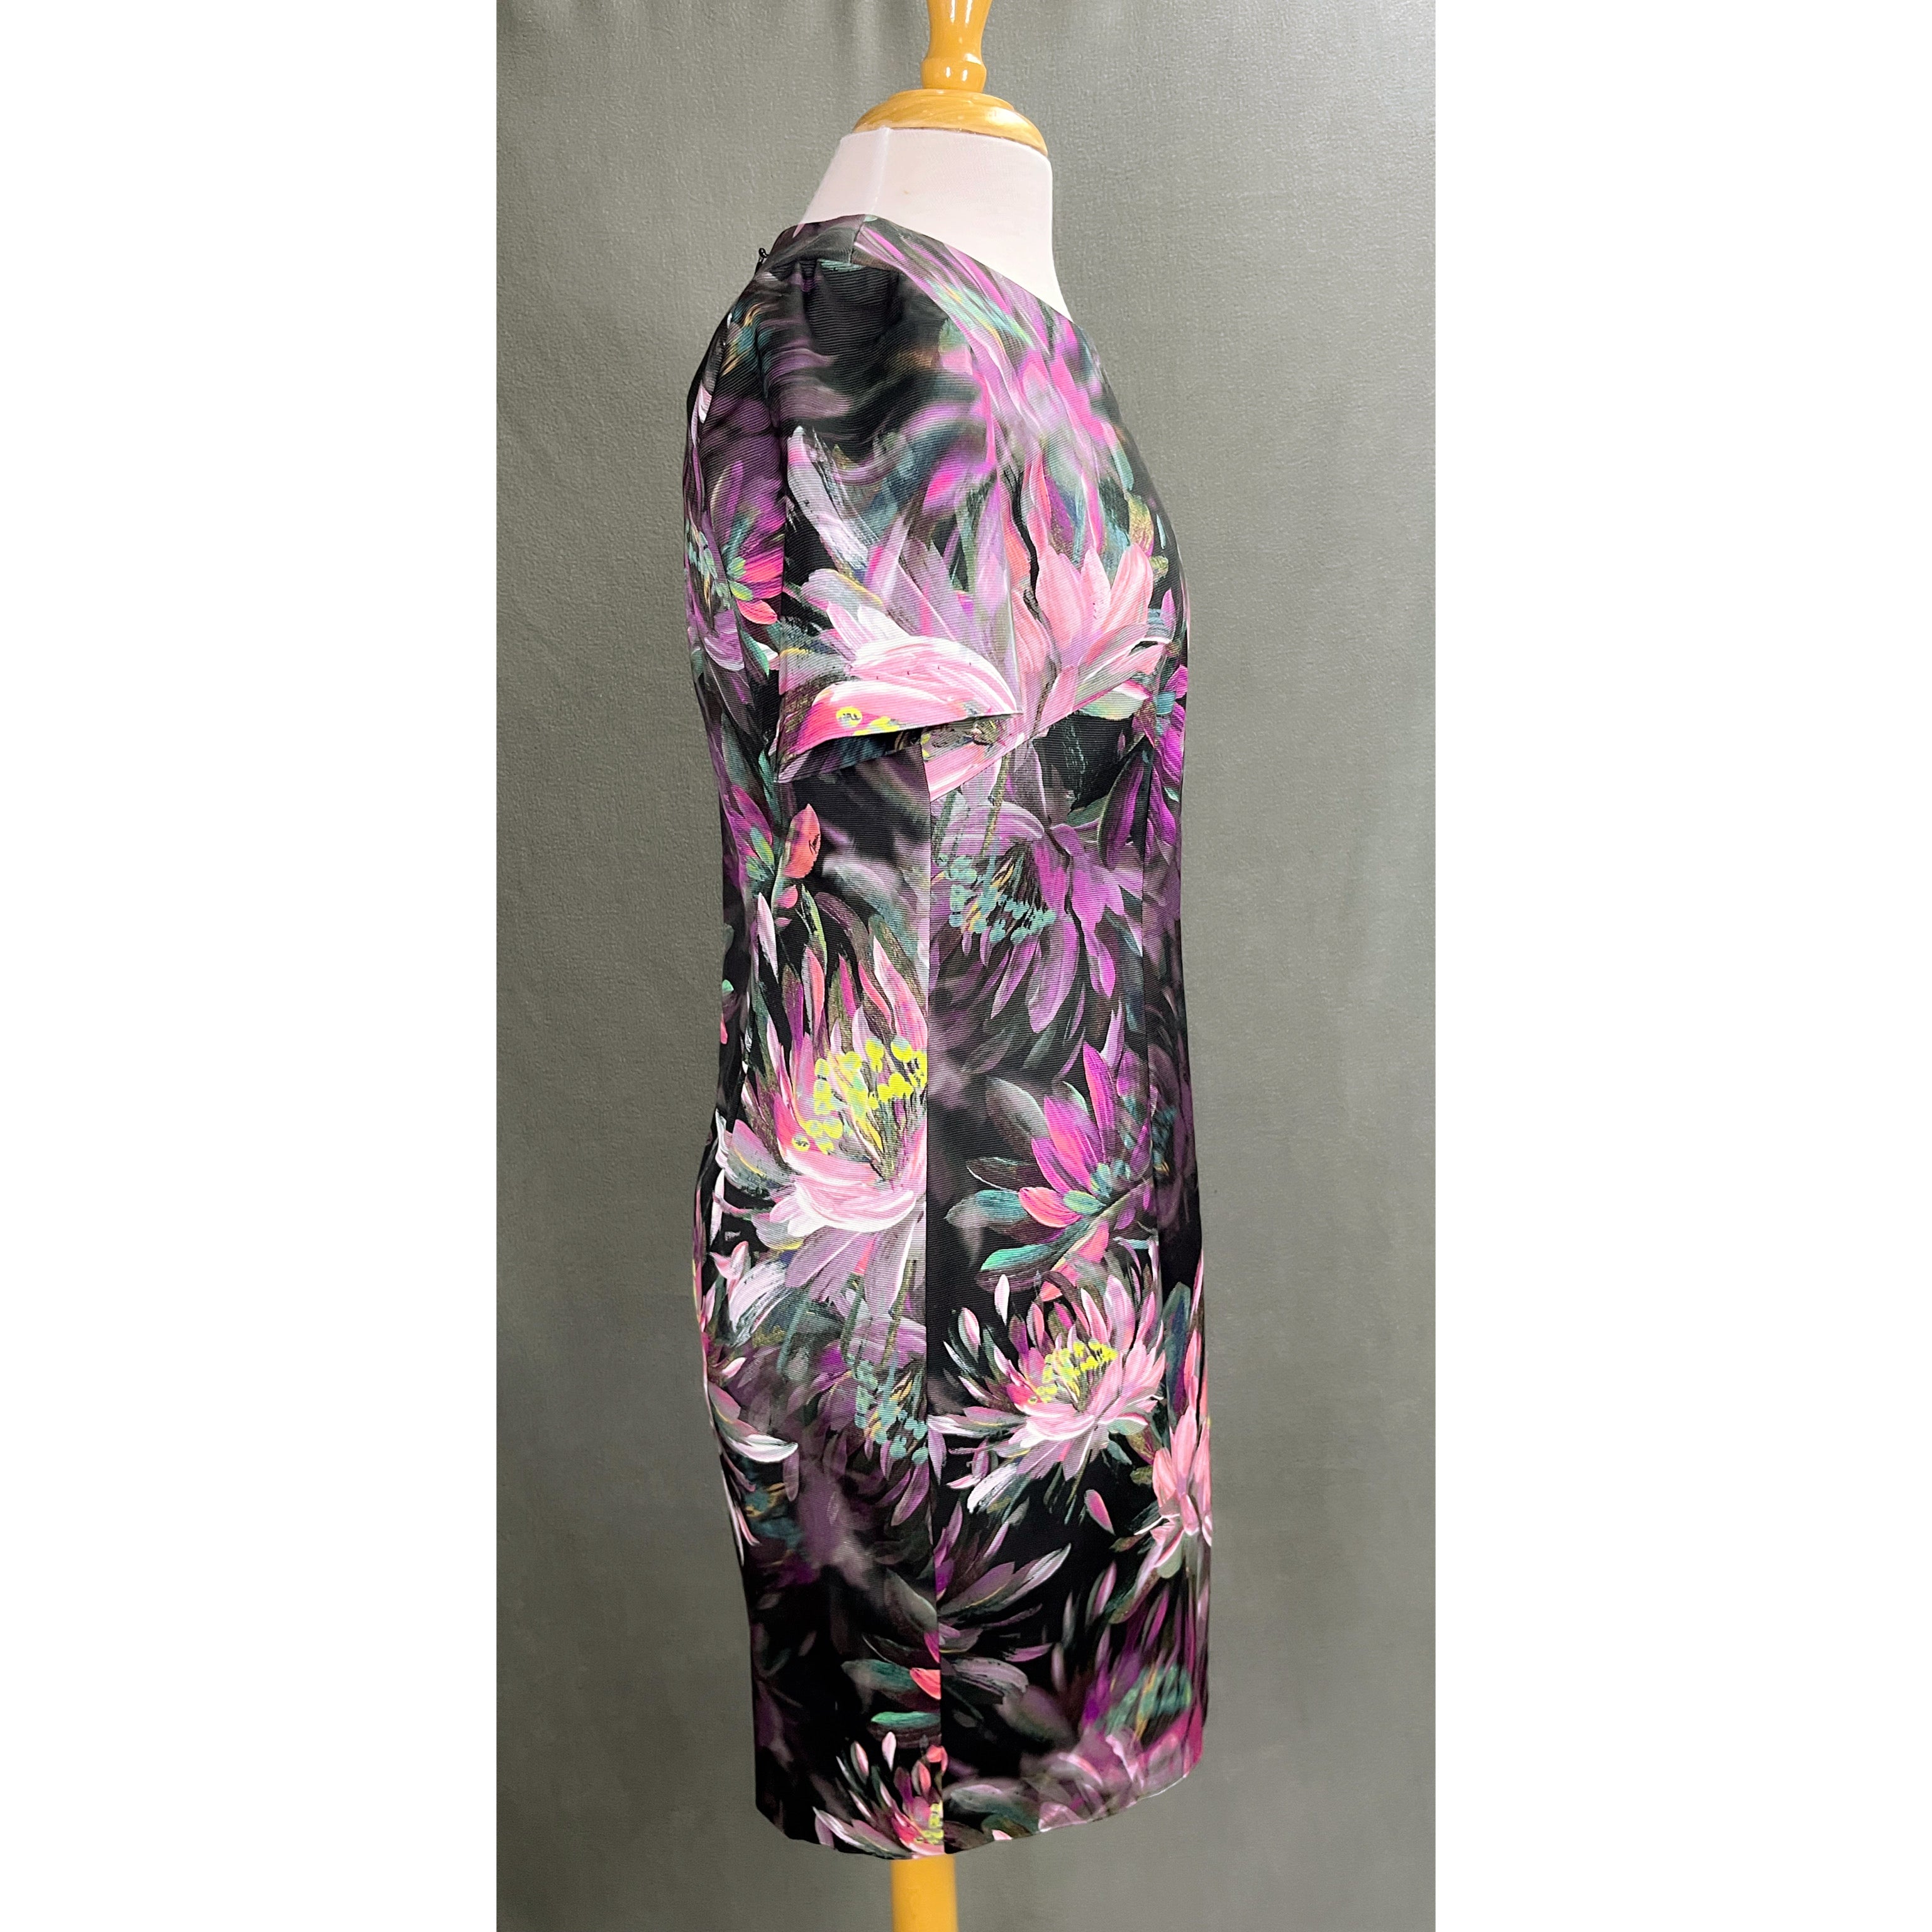 Trina Turk black floral dress, size 6, NEW WITH TAGS!